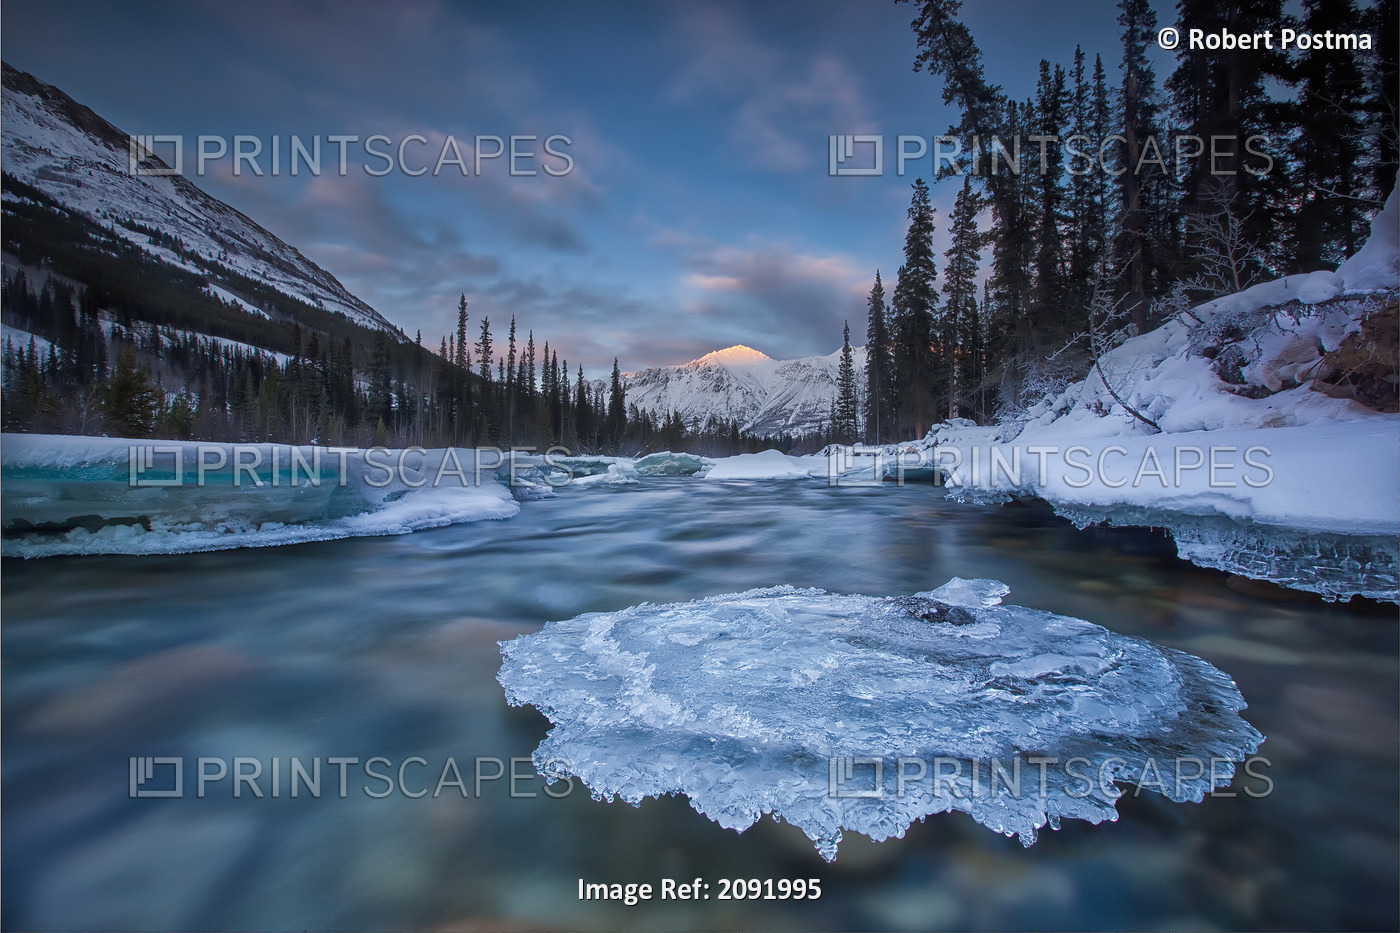 Sunset Over Ice-Covered Rock In Wheaton River; Yukon Canada